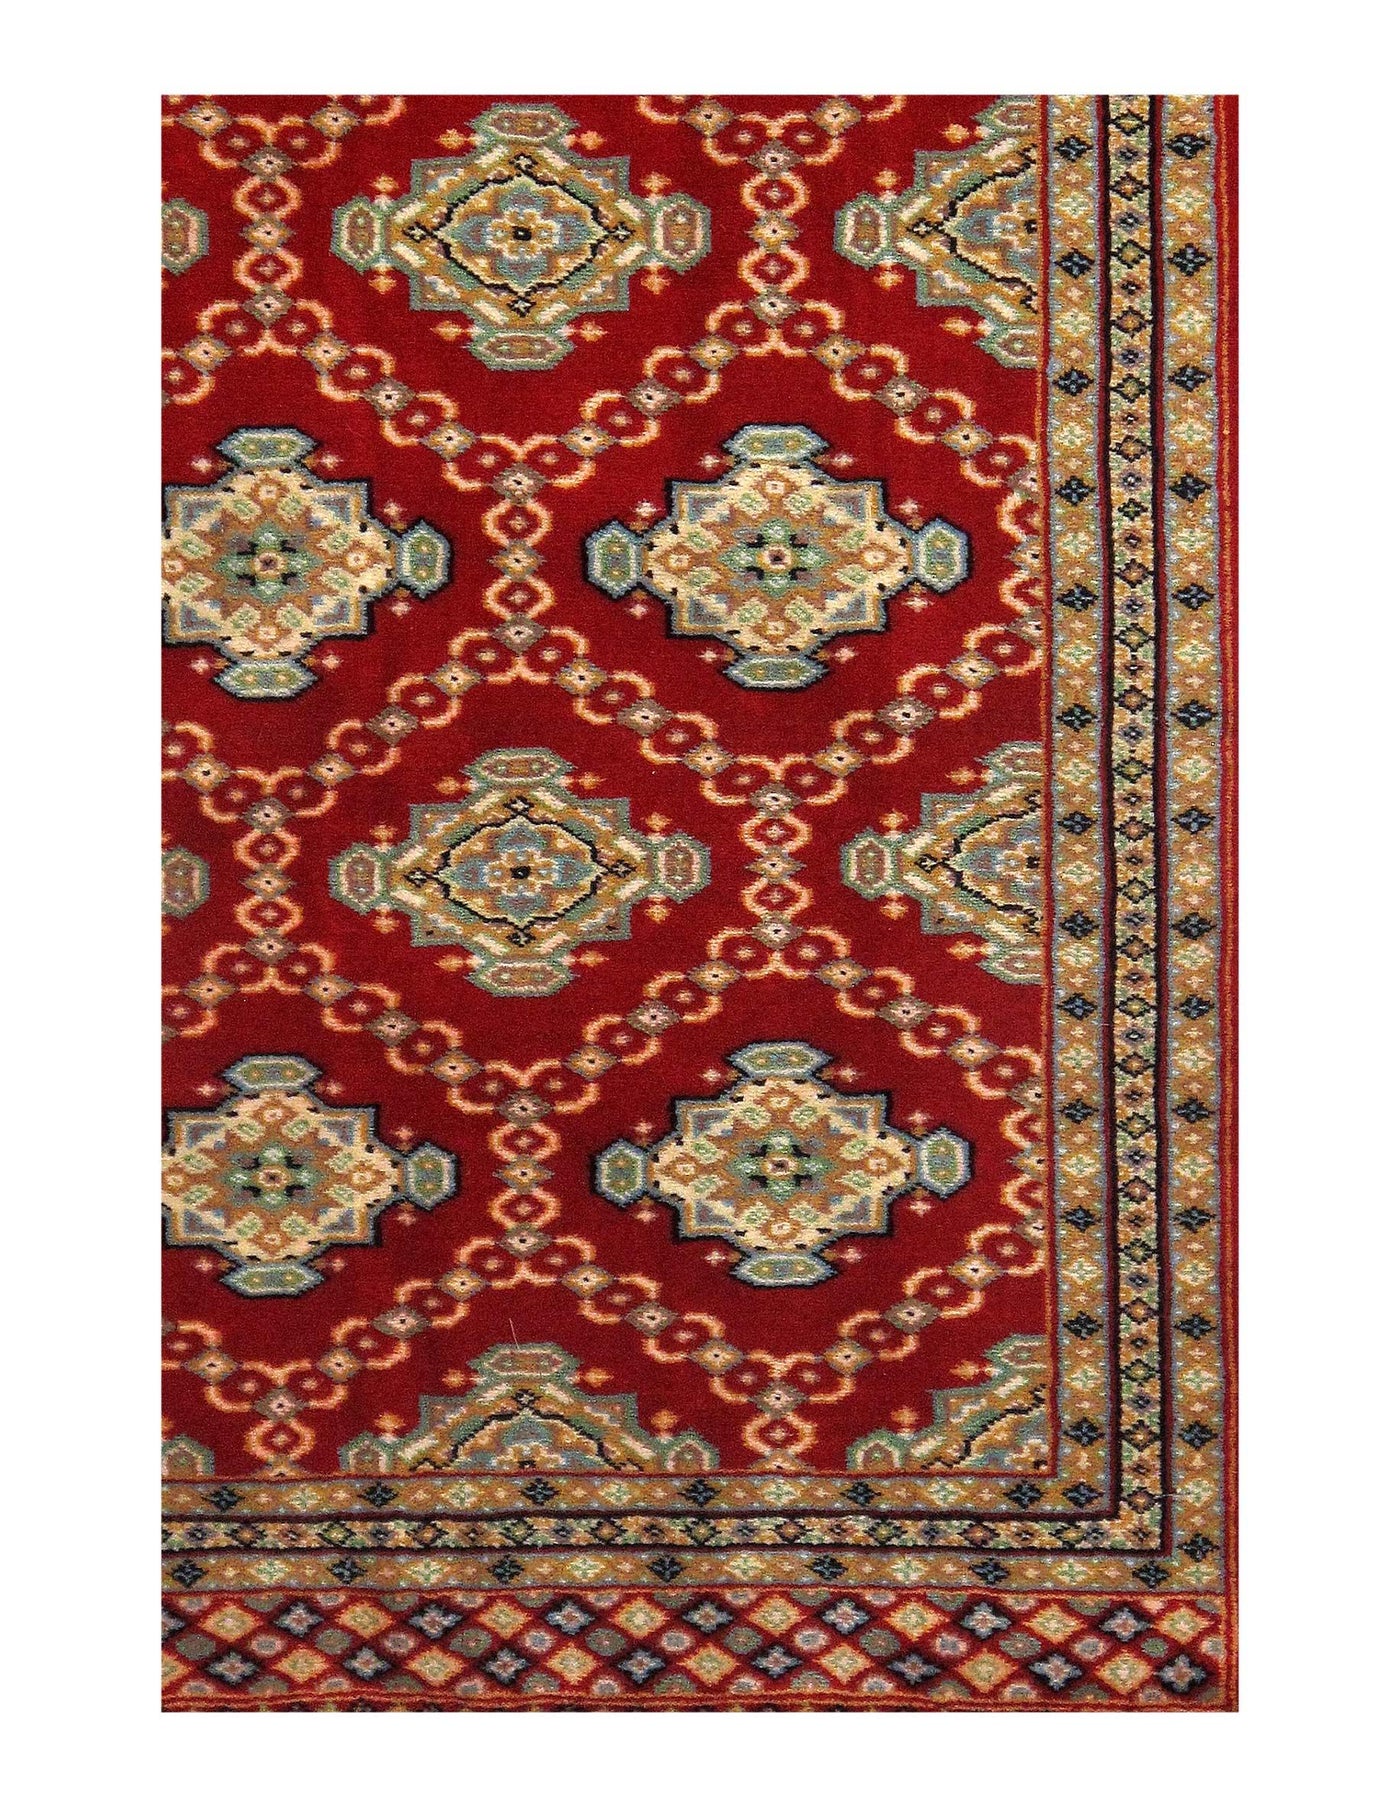 Fine Pak Bokhara Hand-Knotted Rug - 2' × 3'5"